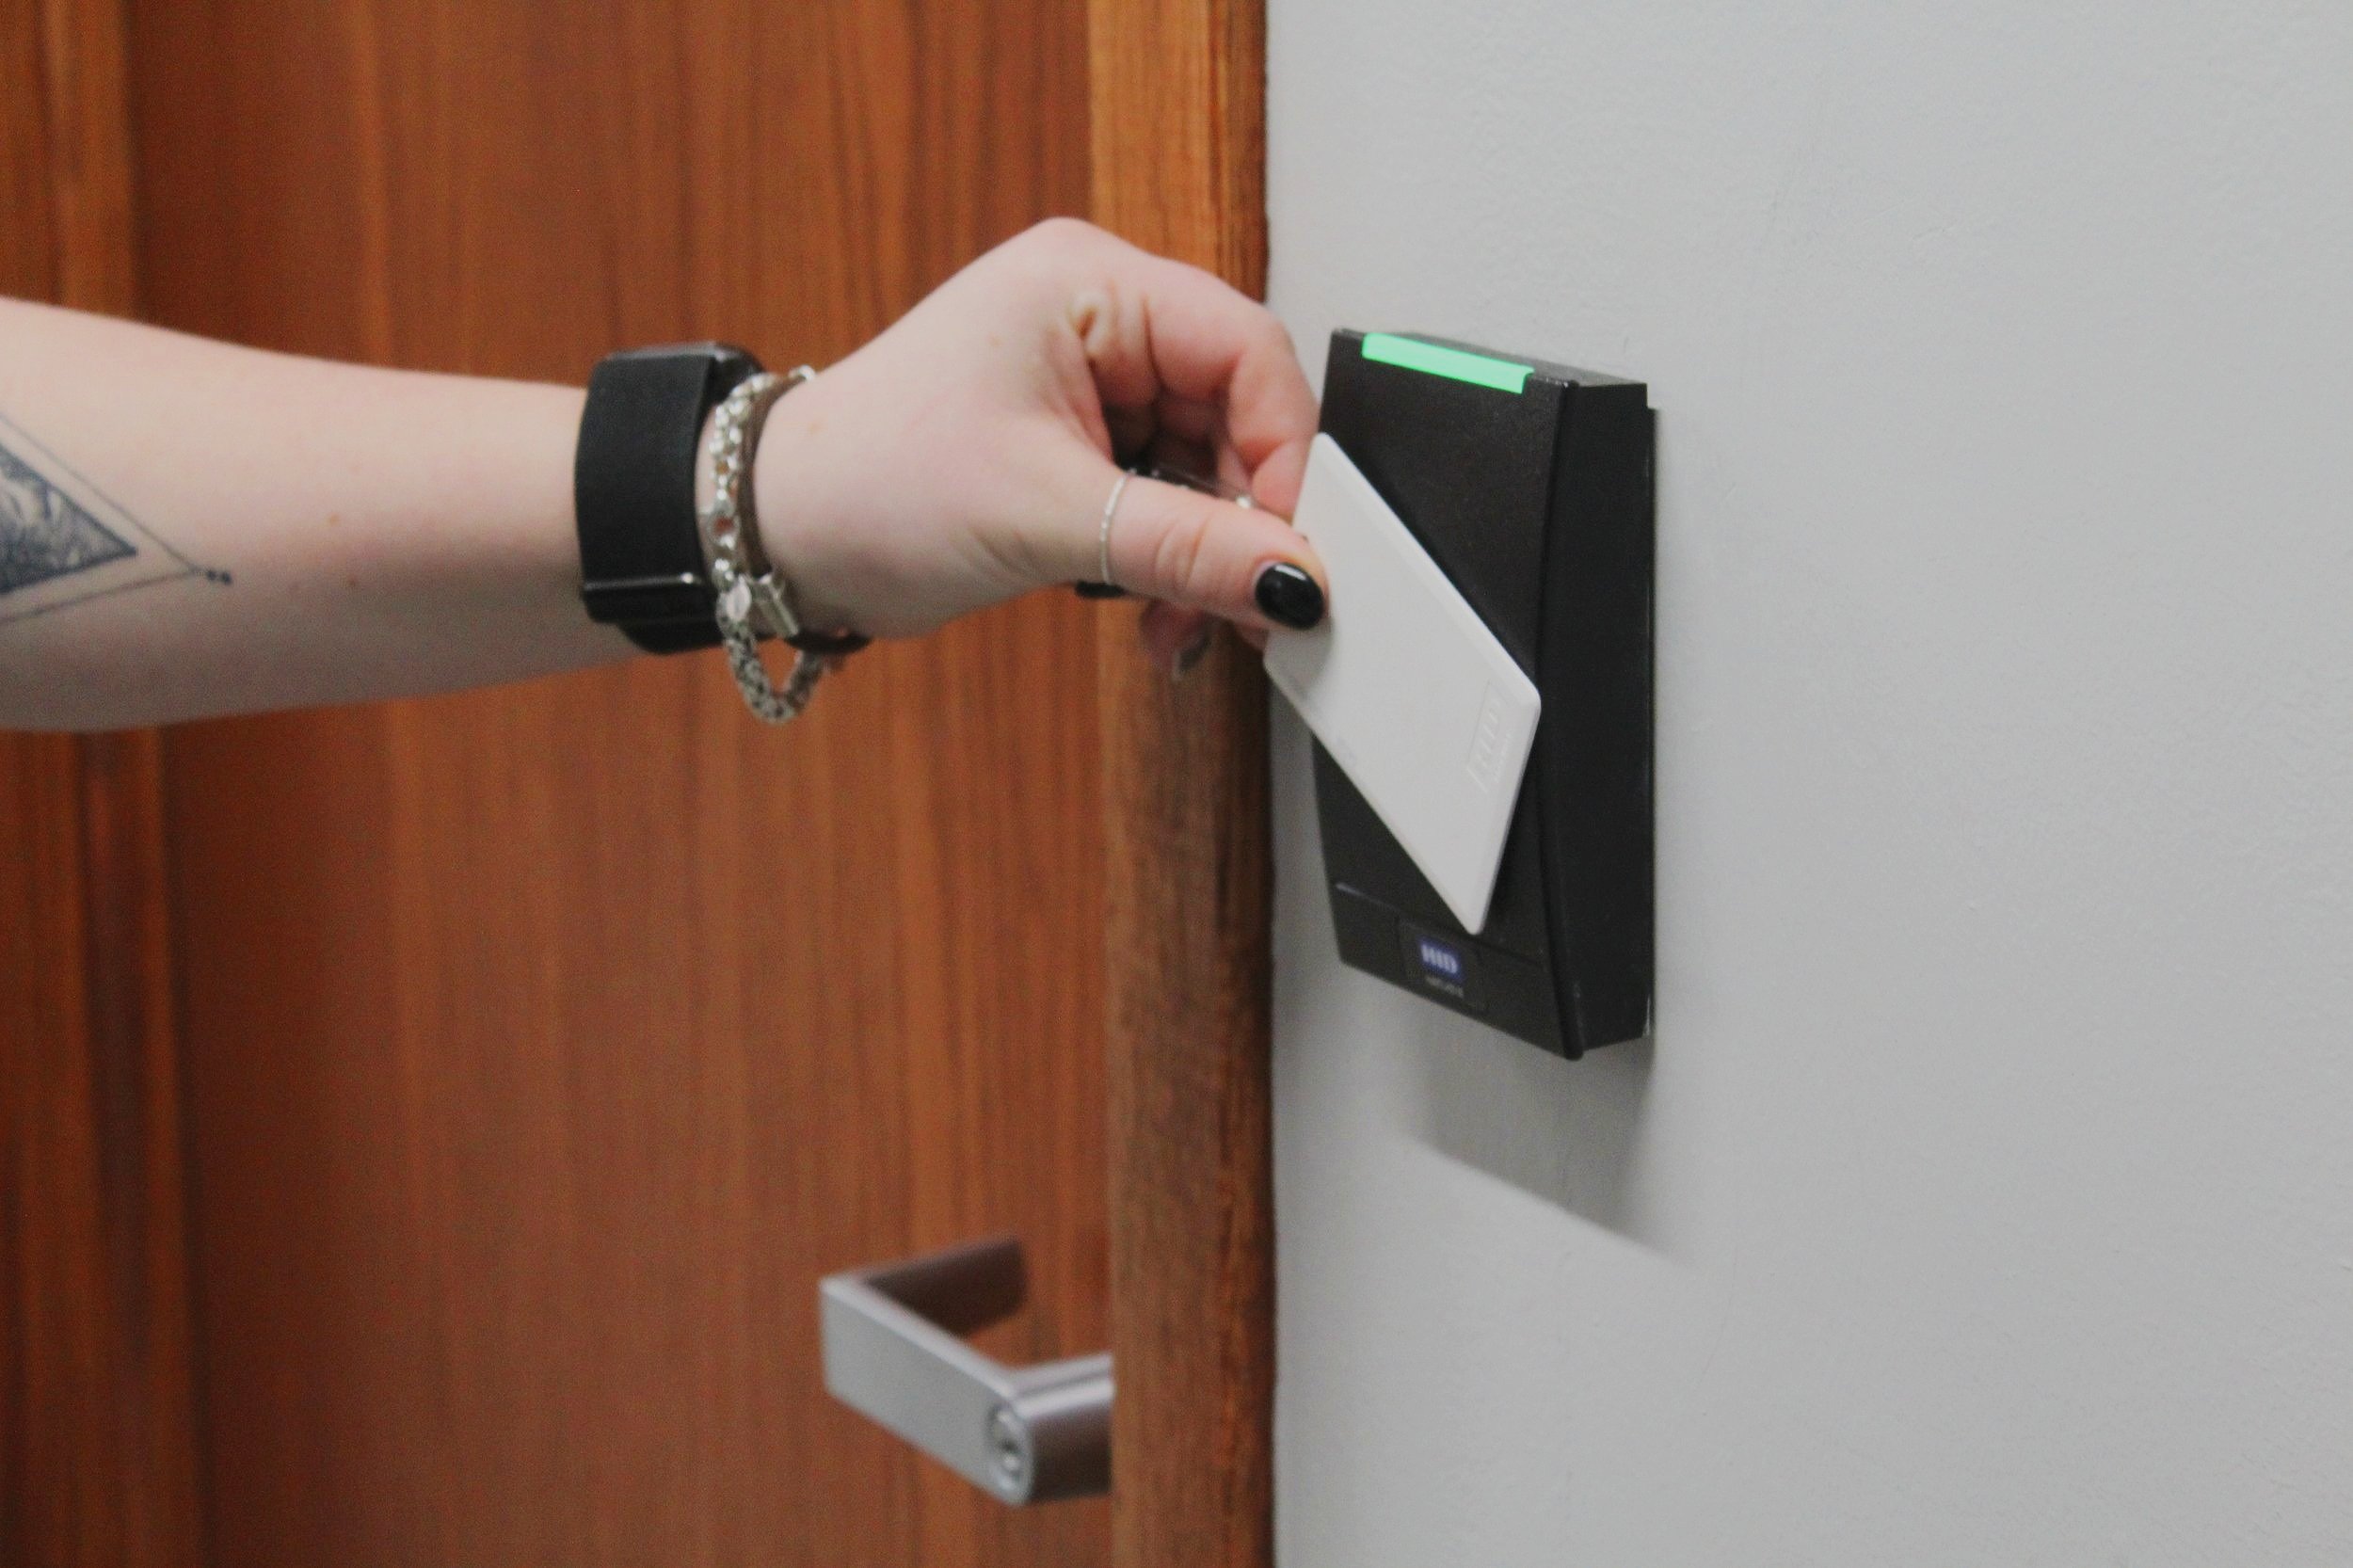 Access Control Where It Should Be: At the Door